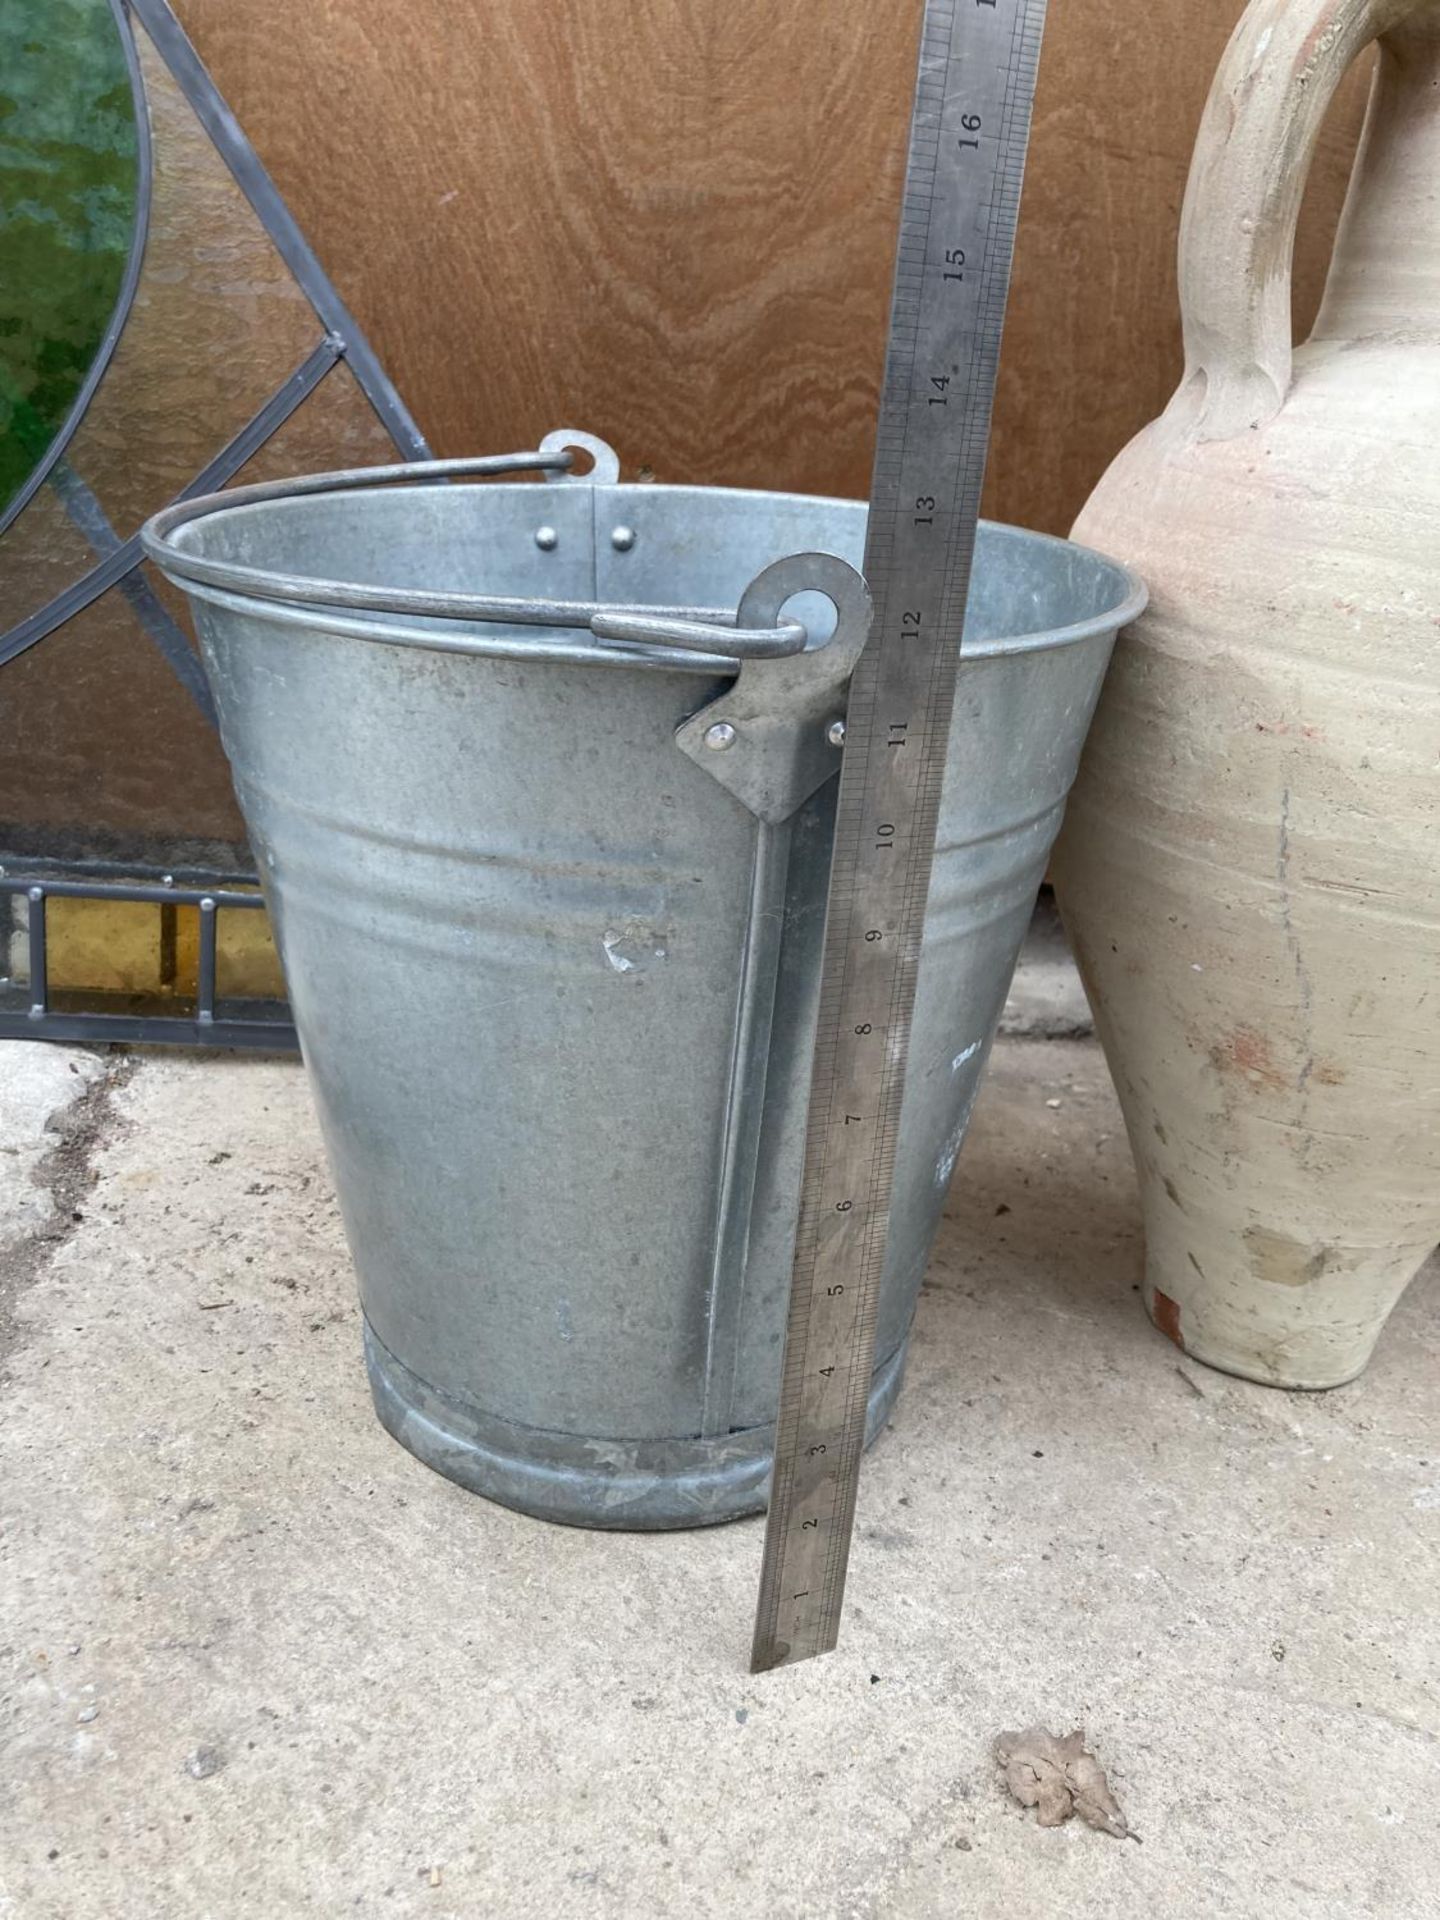 TWO GALAVANISED BUCKETS AND A CERAMIC URN VASE - Image 10 of 10